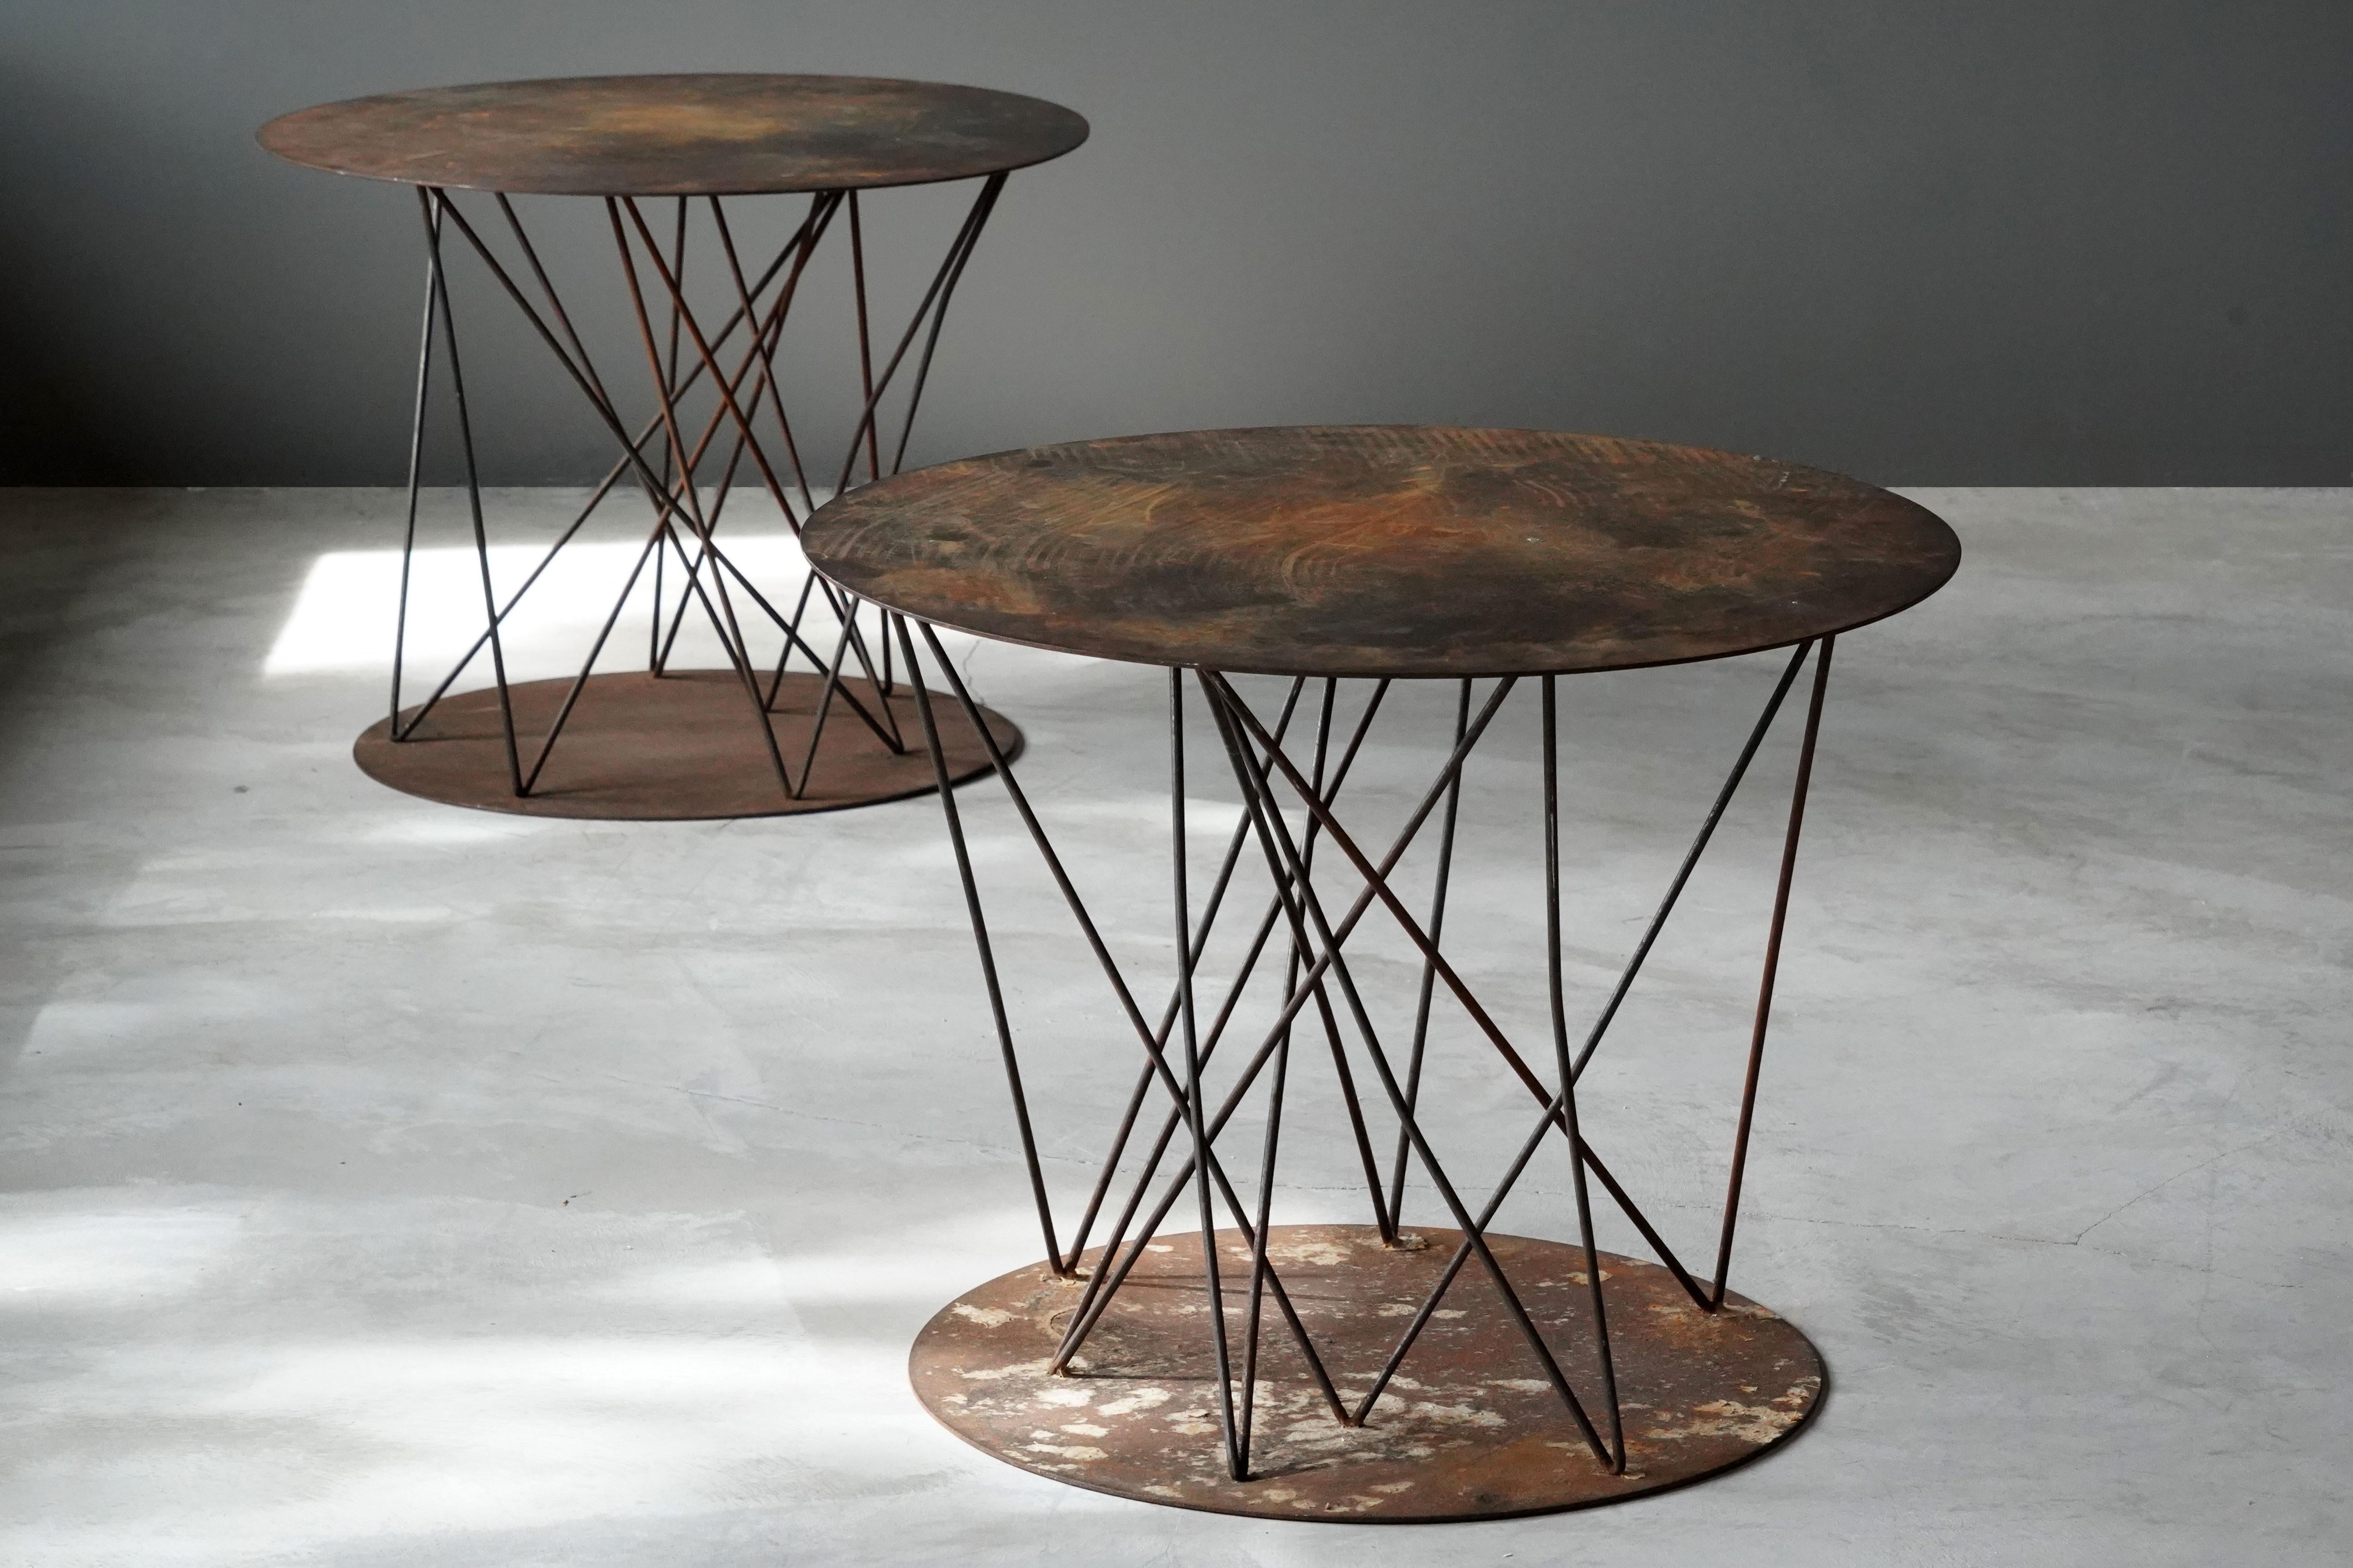 A pair of modernist side tables / occasional tables. By an unknown designer, America, 1970s.

Other designers of the period include Isamu Noguchi, Pierre Jeanneret, Jean Prouvé and George Nakashima.